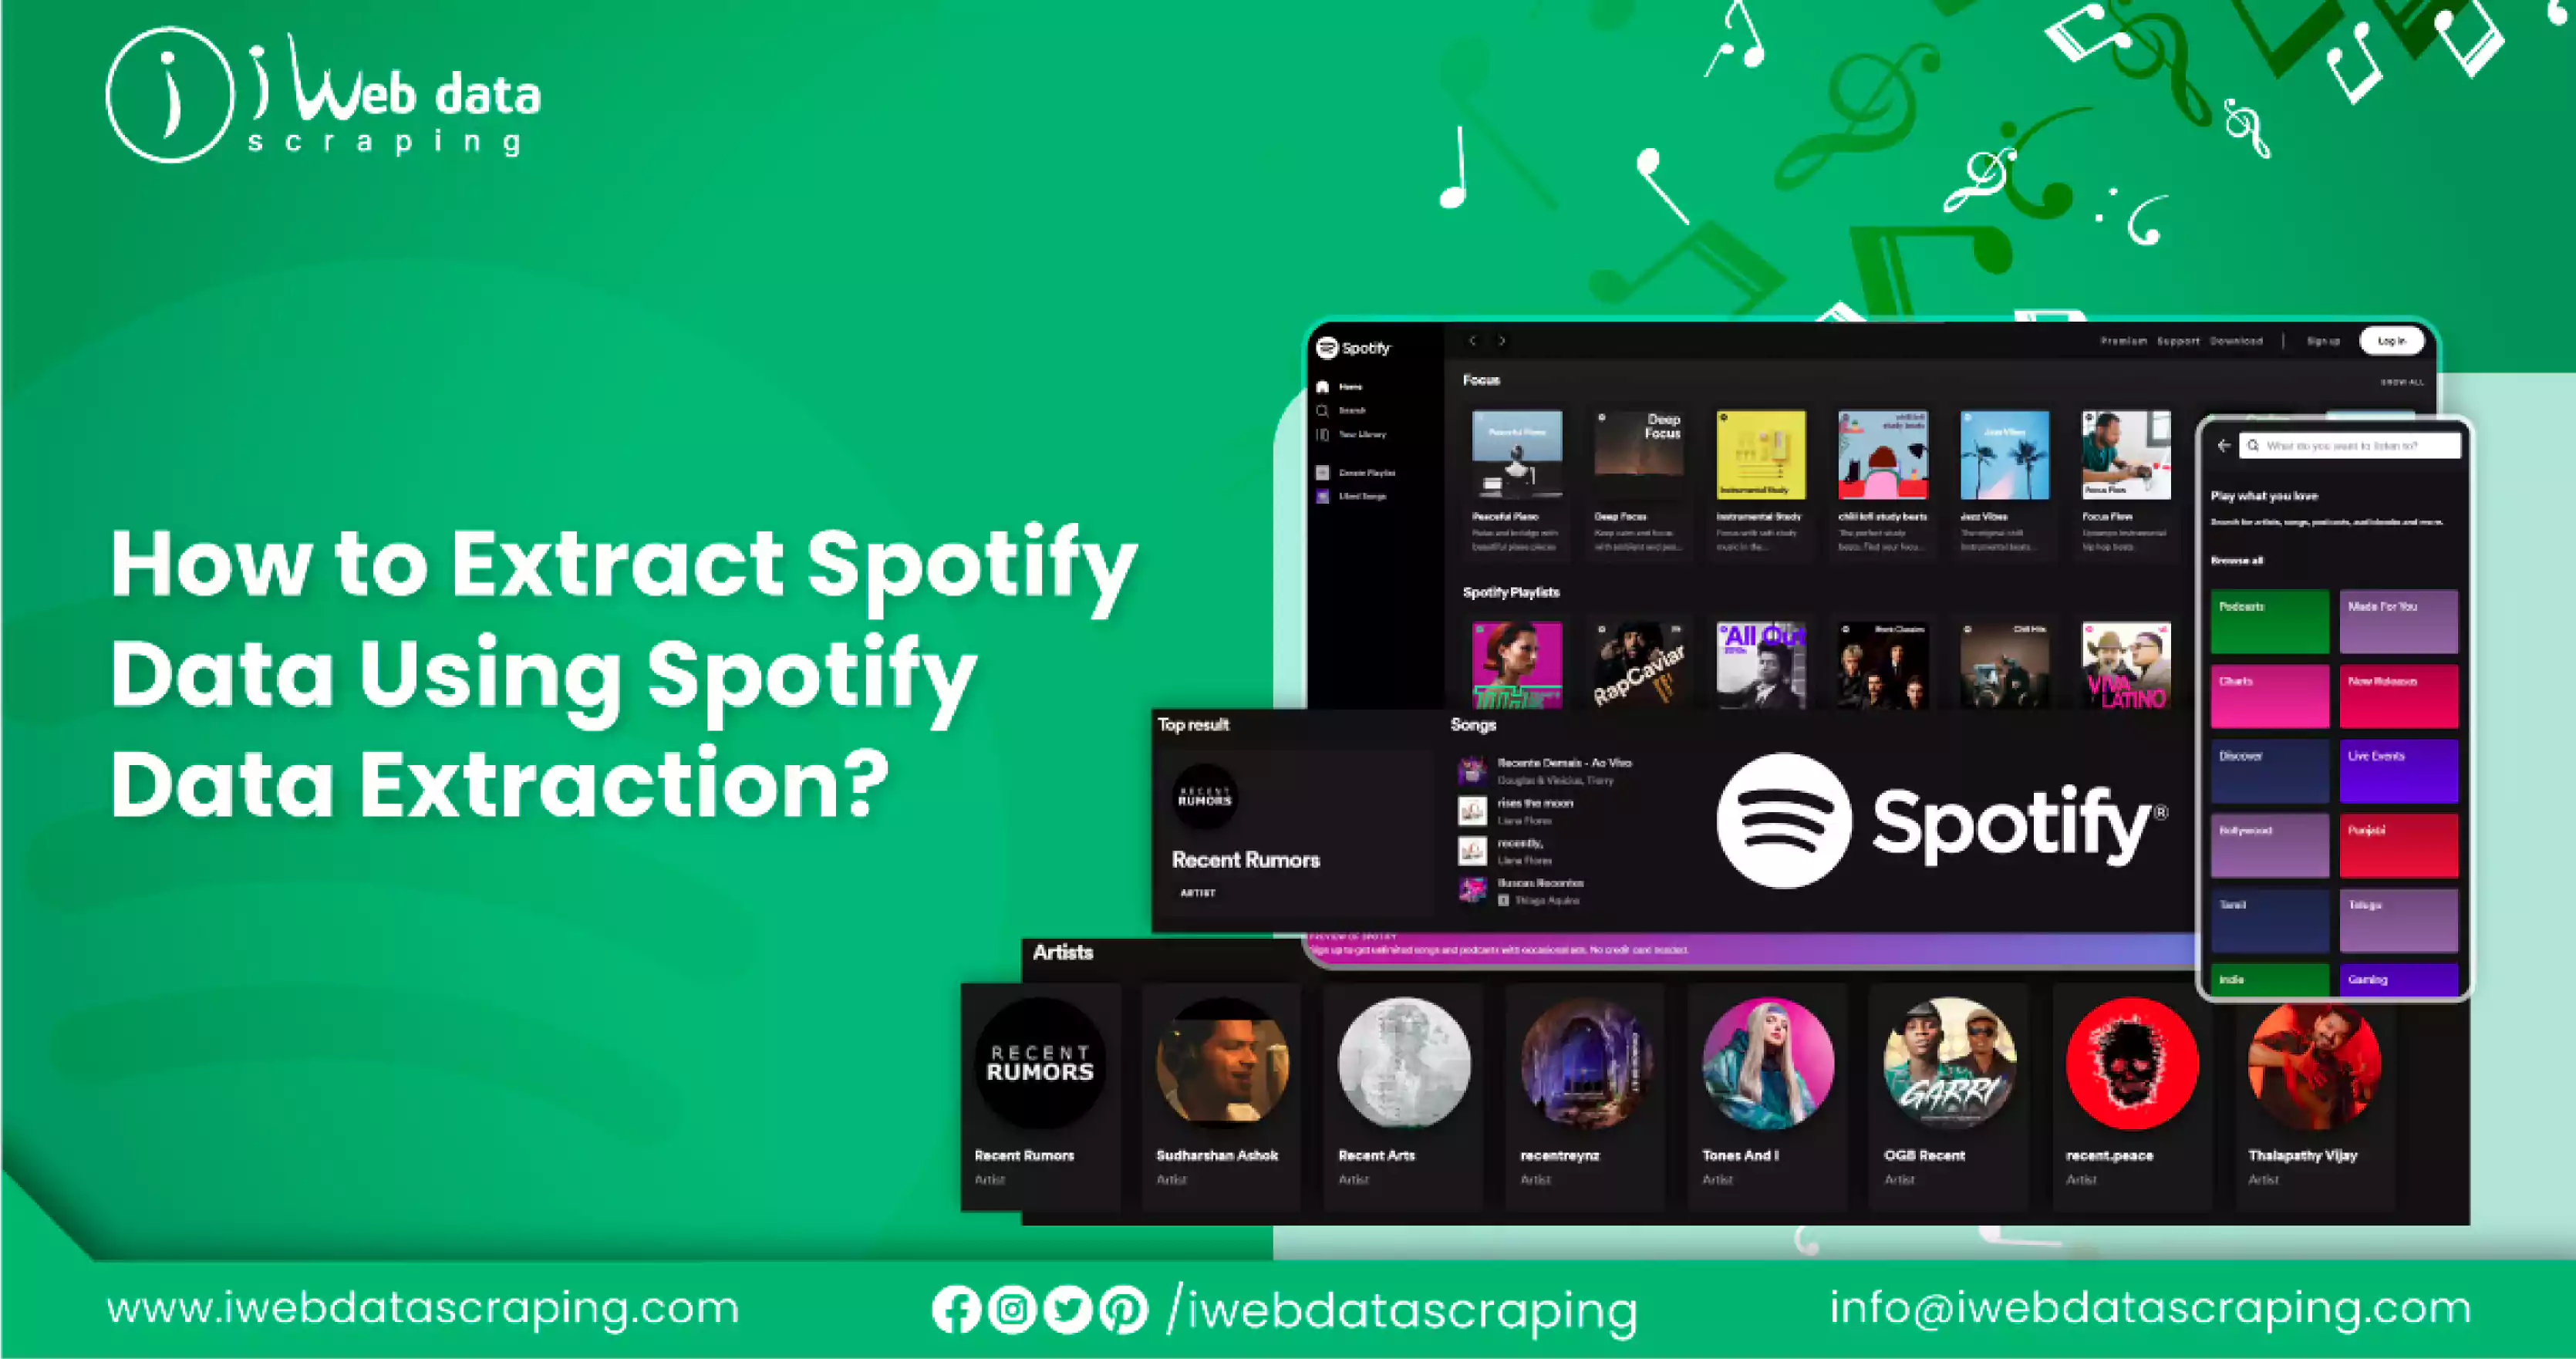 How-to-Extract-Spotify-Data-Using-Spotify-Data-Extraction.jpg